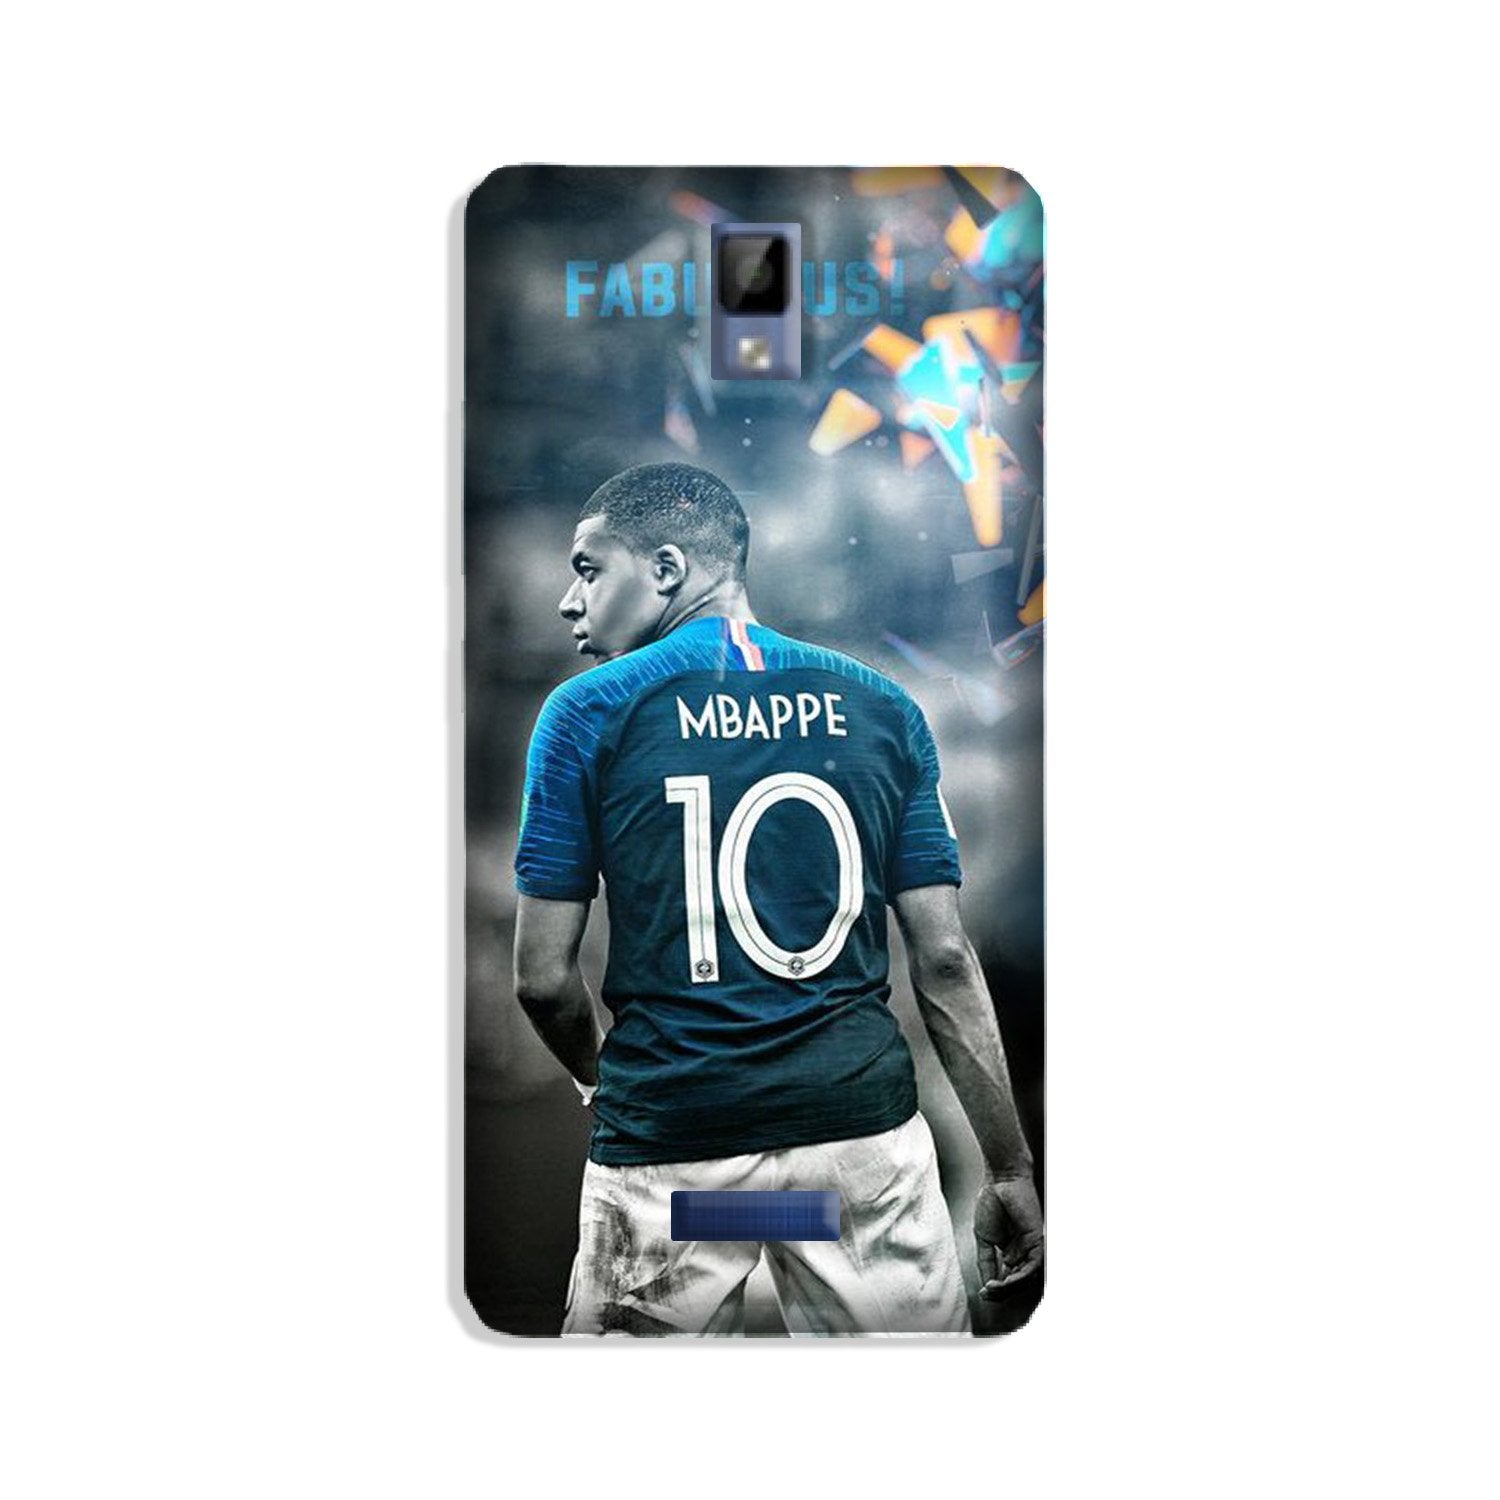 Mbappe Case for Gionee P7(Design - 170)